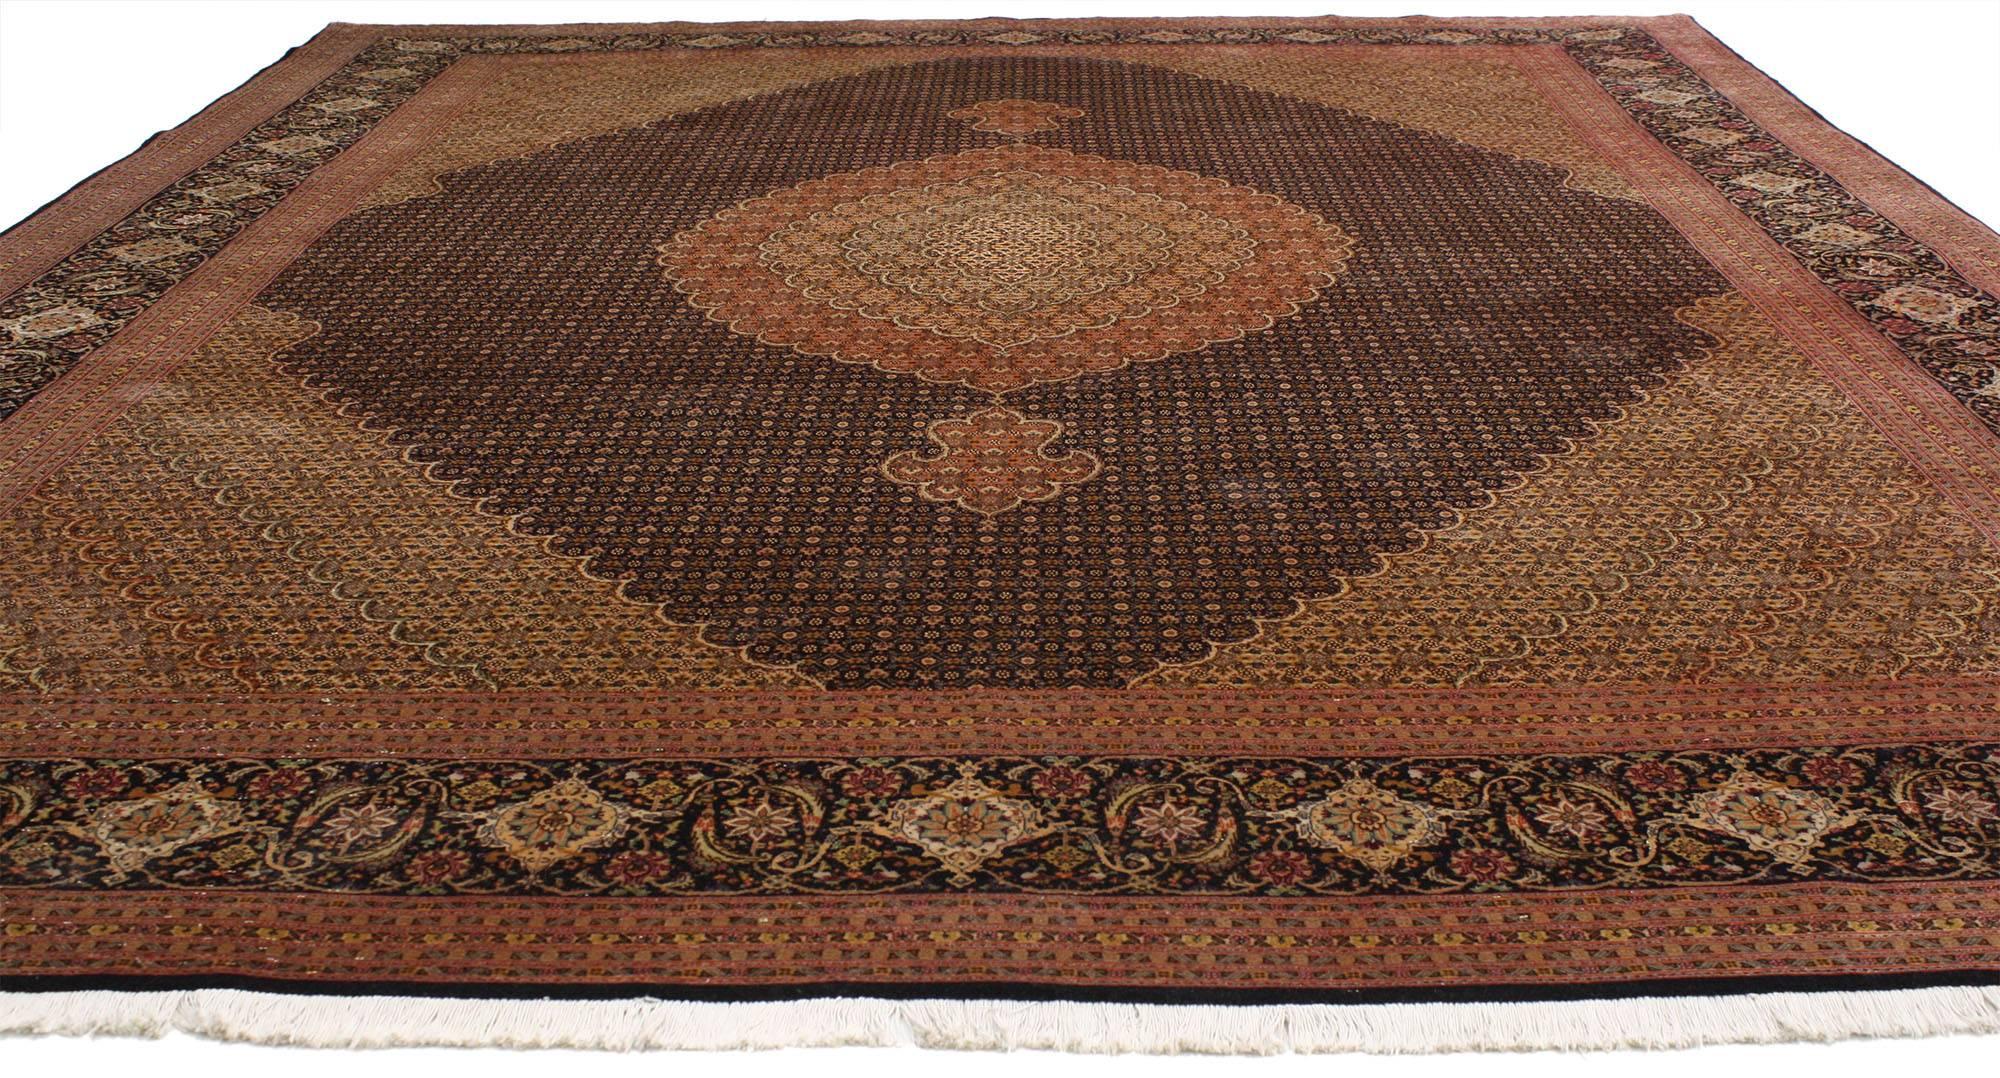 76980, vintage Persian Mahi fish design Tabriz rug with traditional style. This eye-catching beauty of a vintage Persian Tabriz rug features a central overlapping floral medallion. The medallion floats in a sea of delicate flowers captivating the